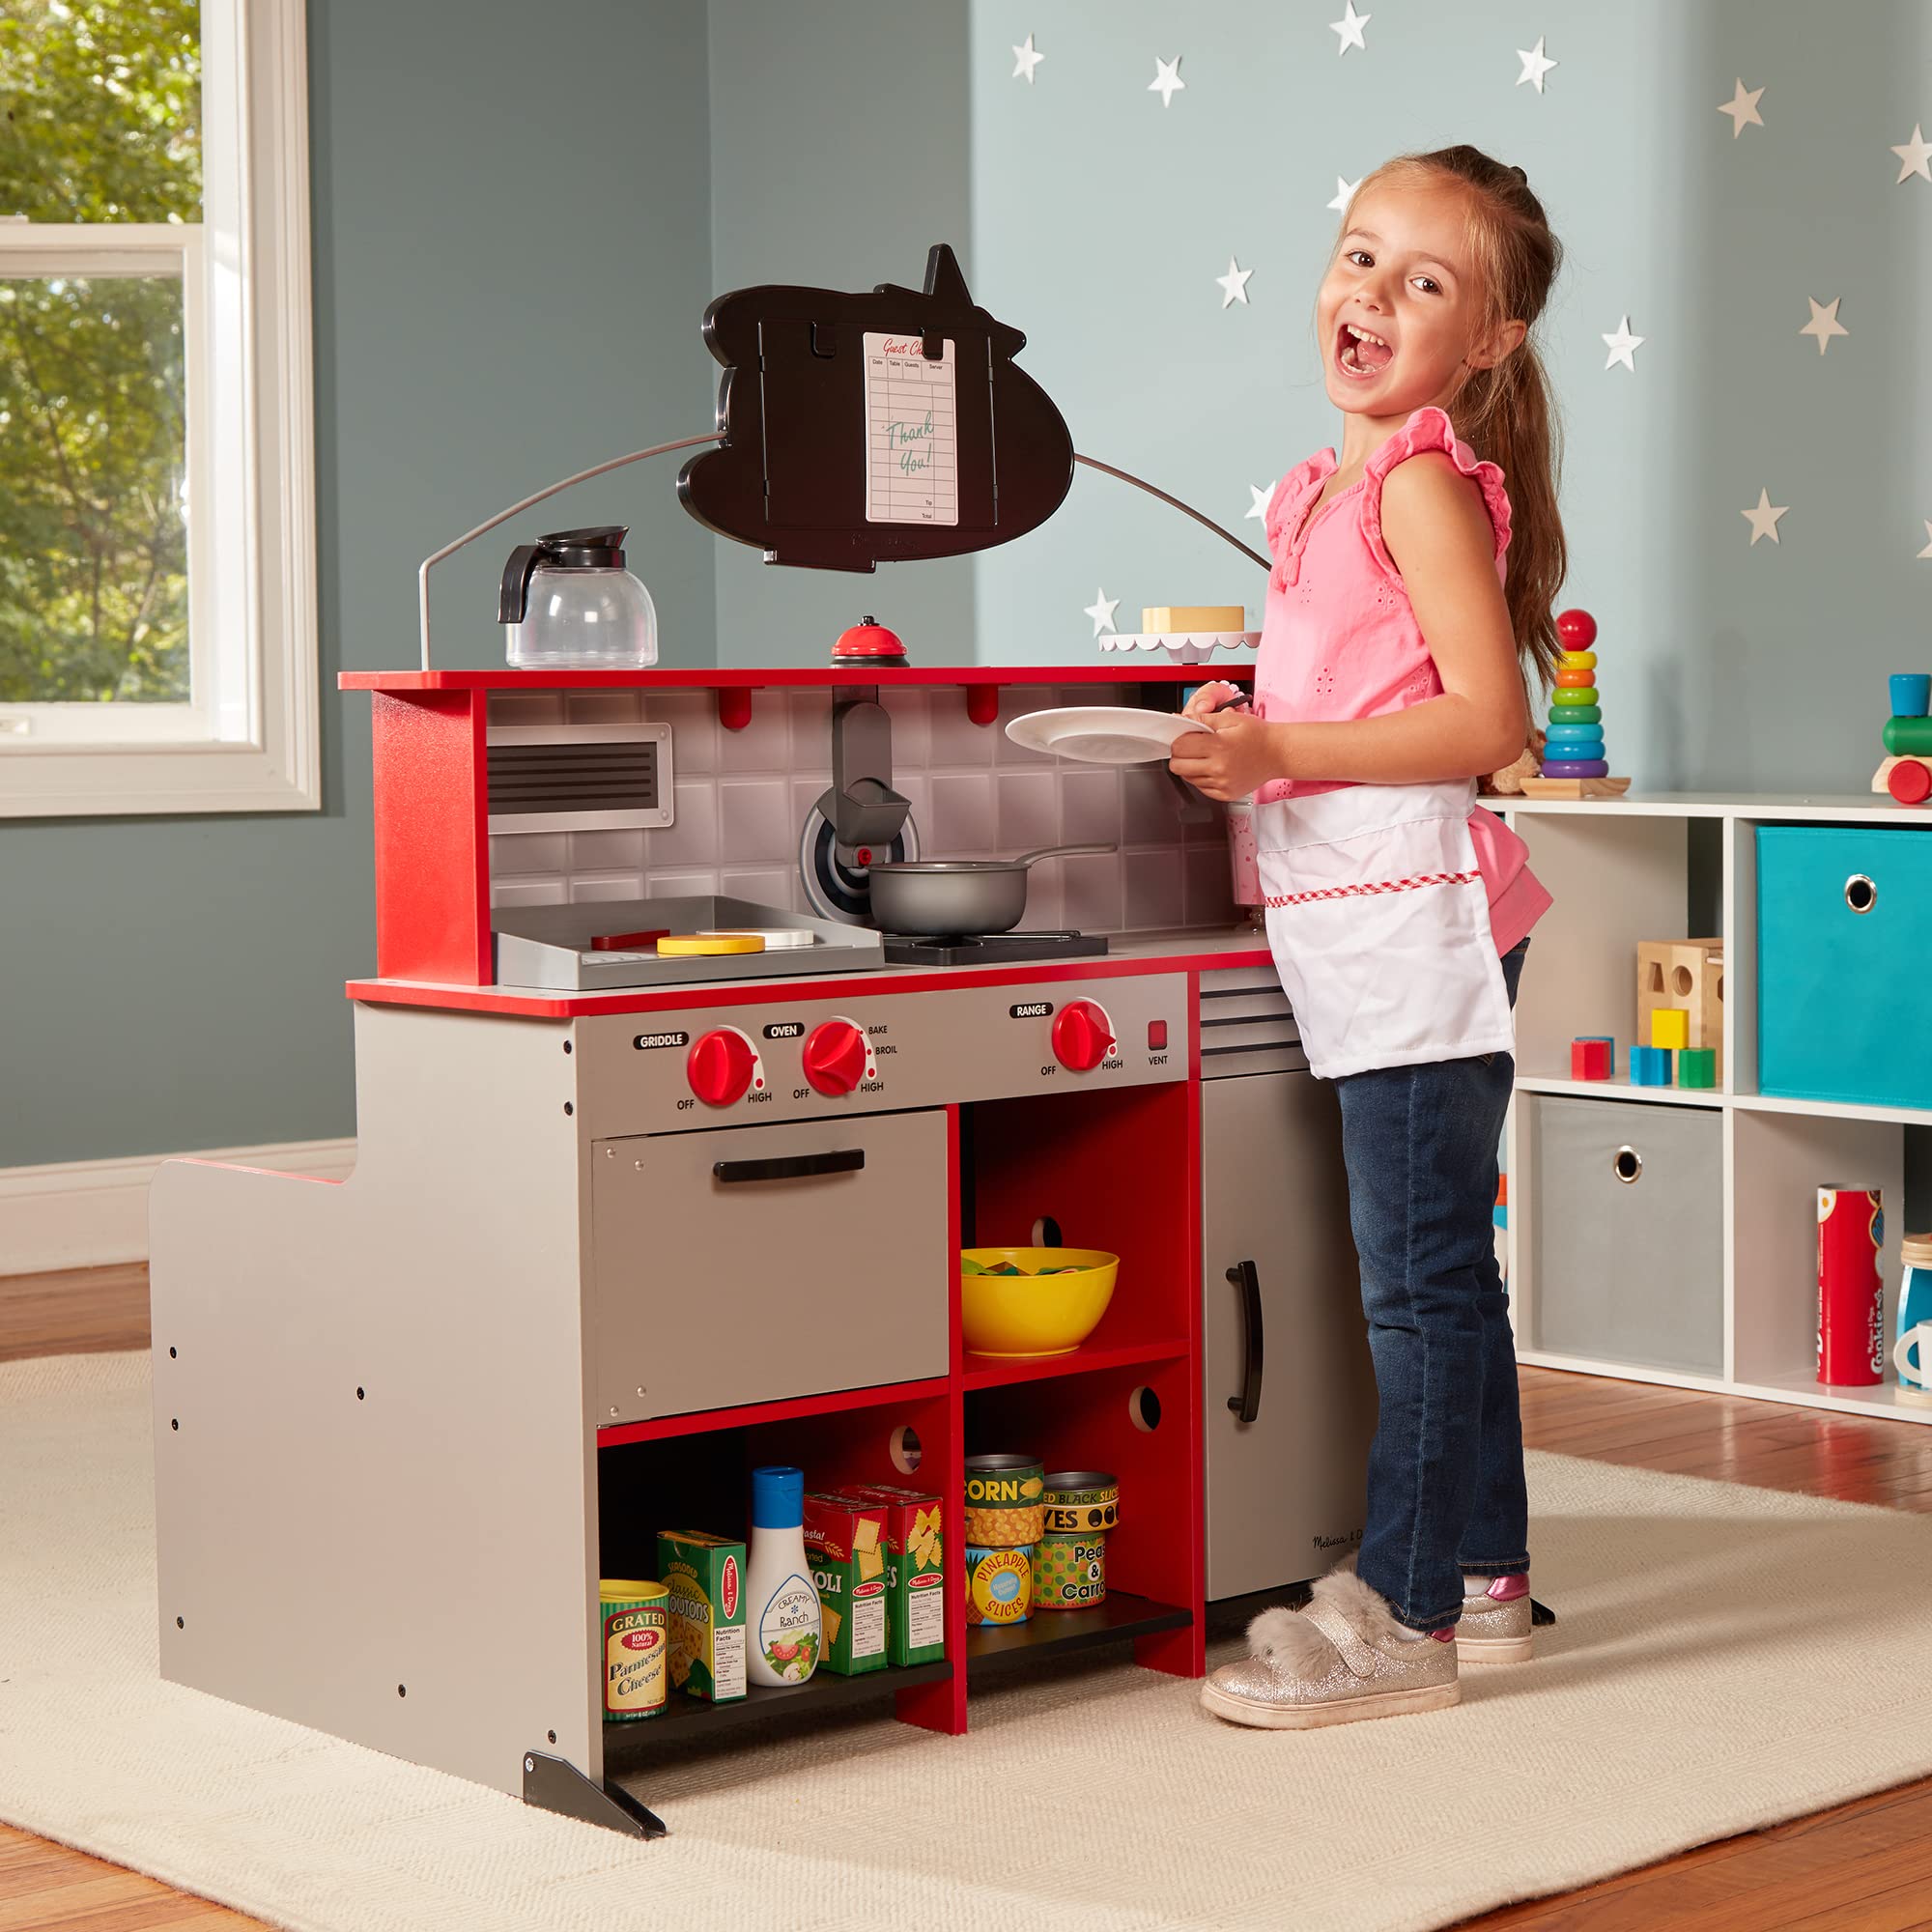 Melissa & Doug Double-Sided Wooden Star Diner Restaurant Play Space